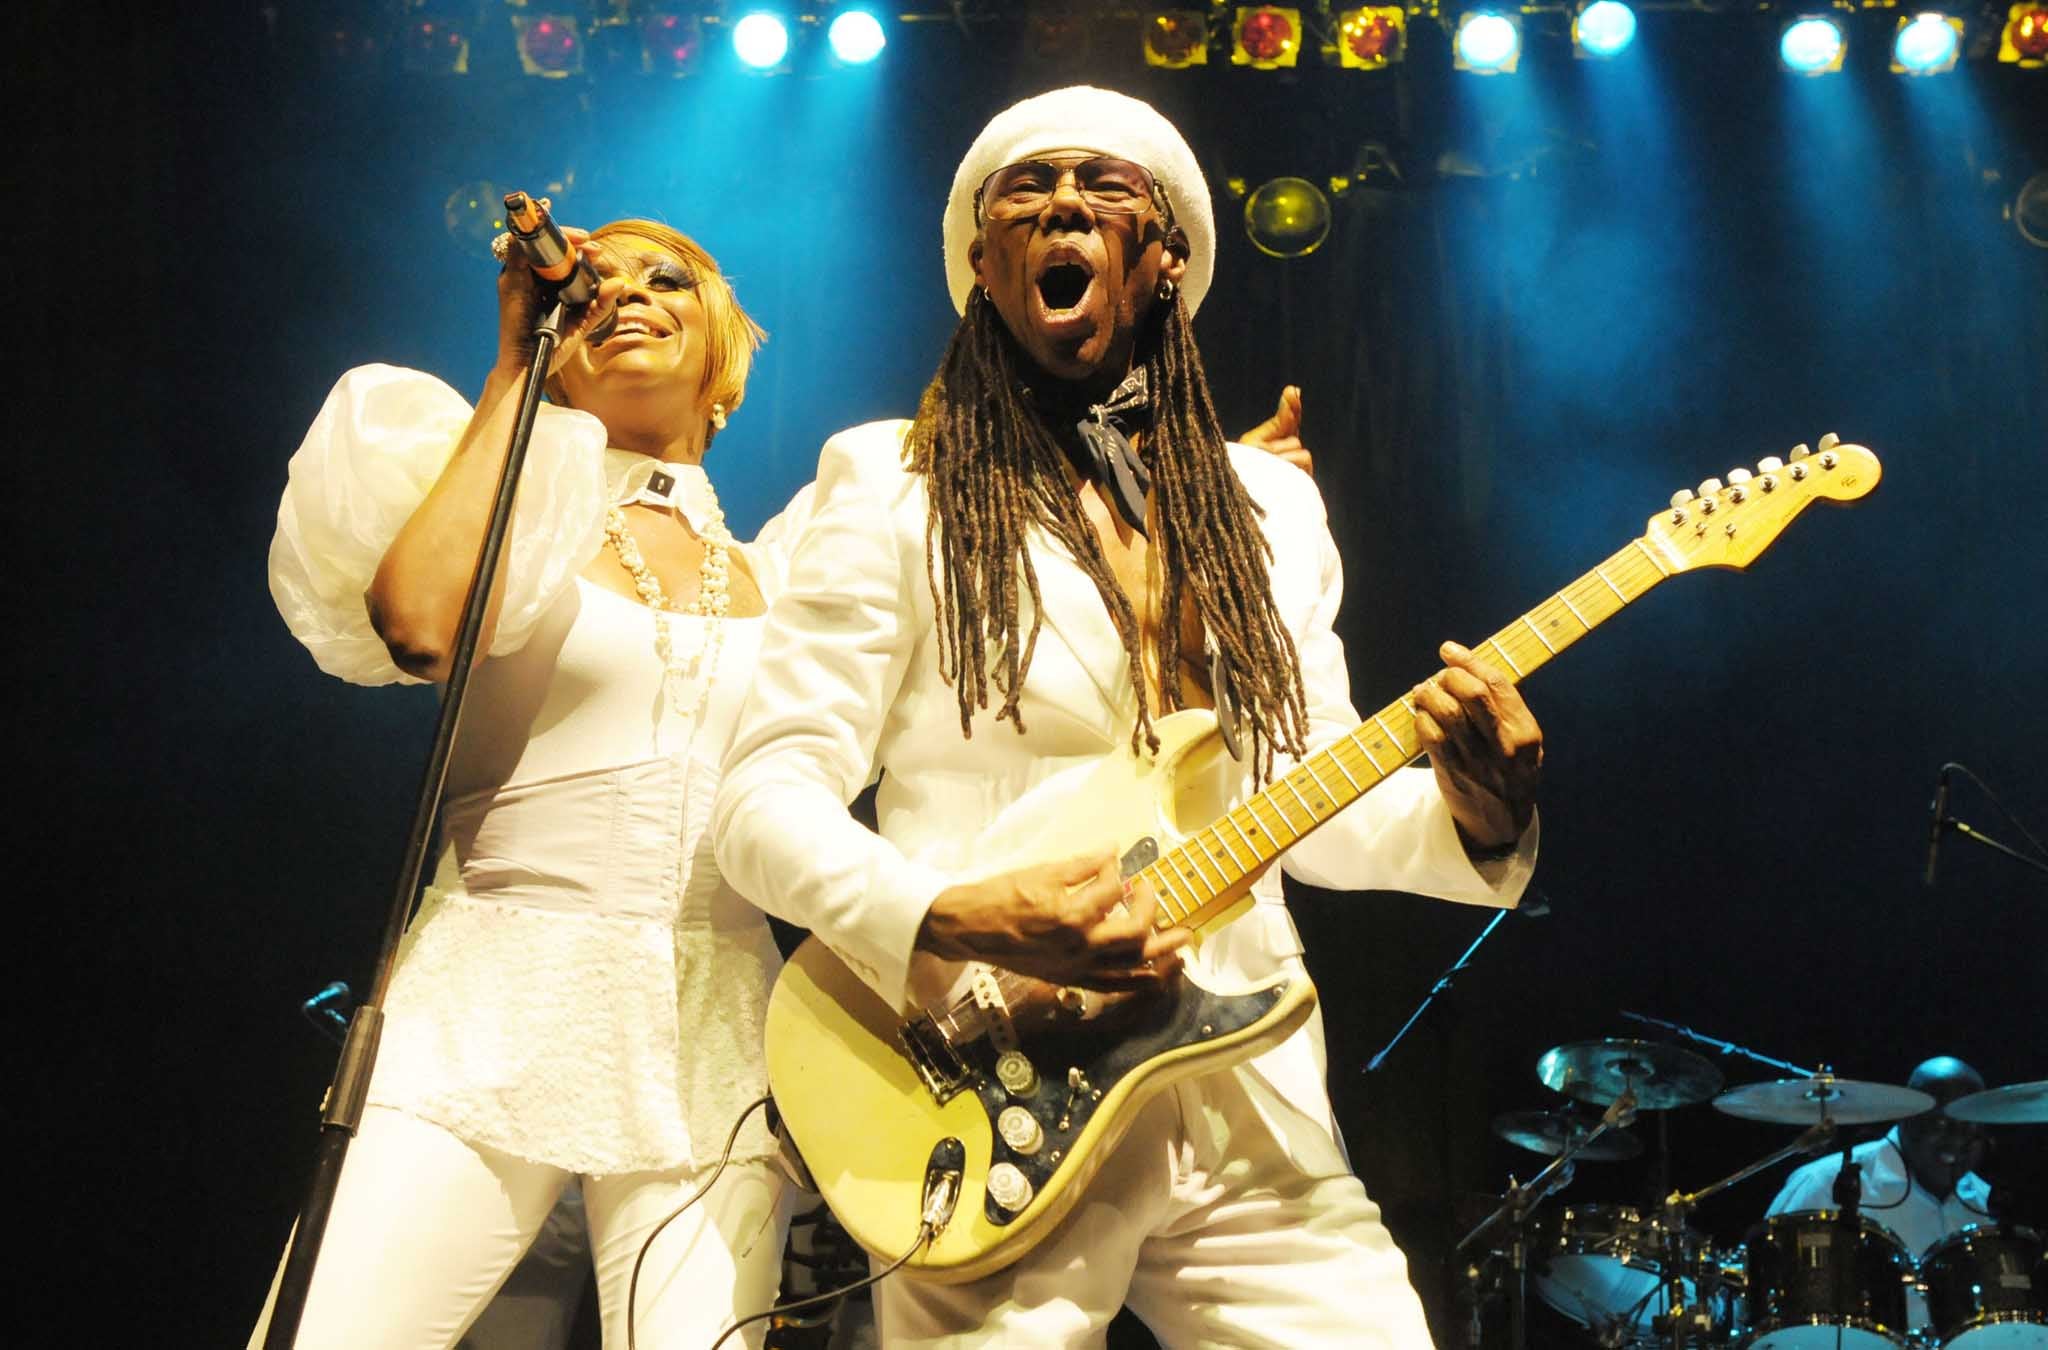 Nile Rodgers and his band Chic will close Bestival 2014, it has been confirmed